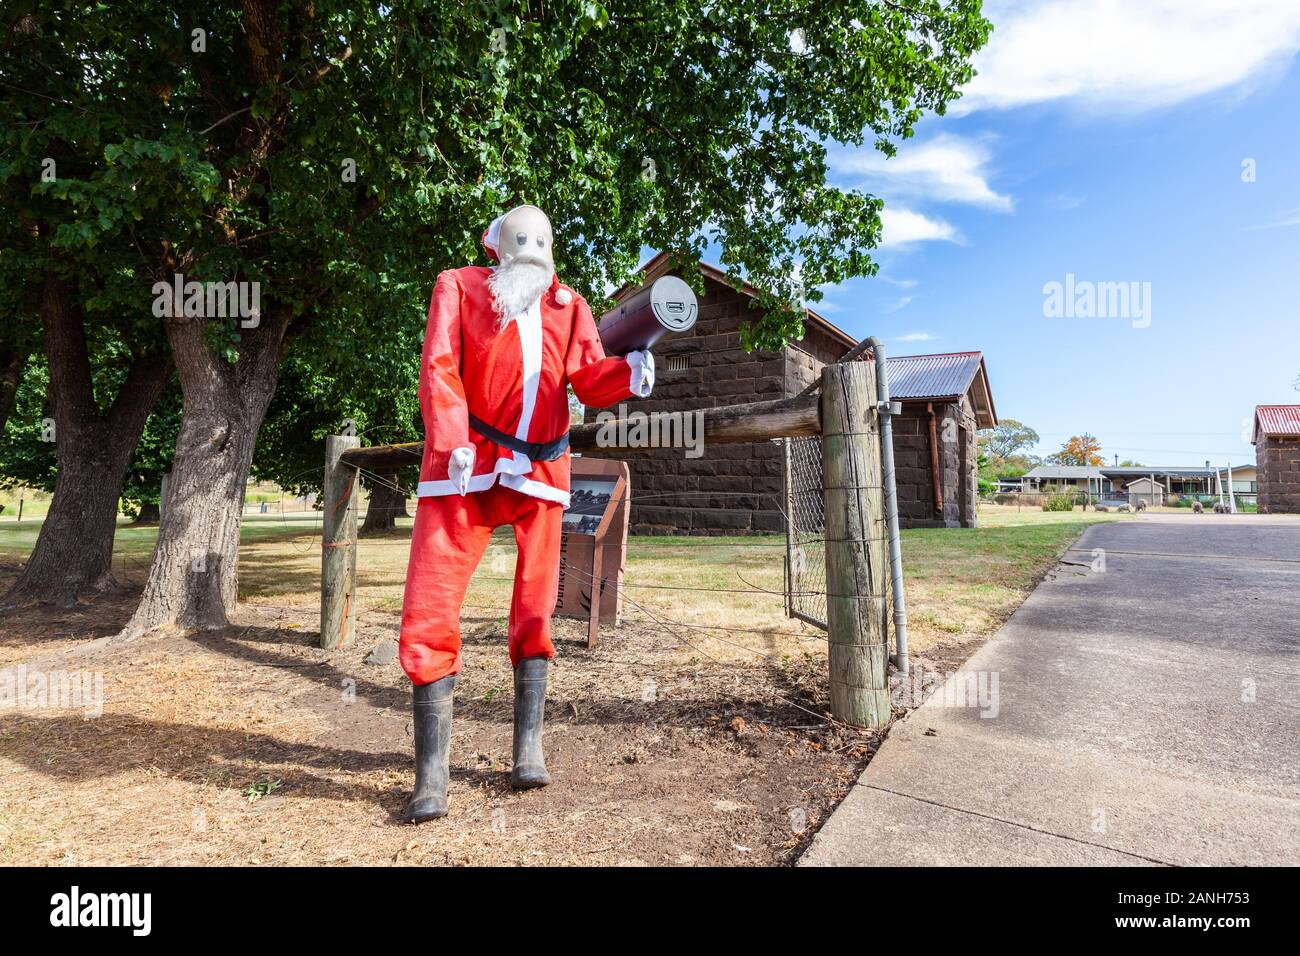 Large Santa Claus doll holding mailbox in Australian outback Stock Photo